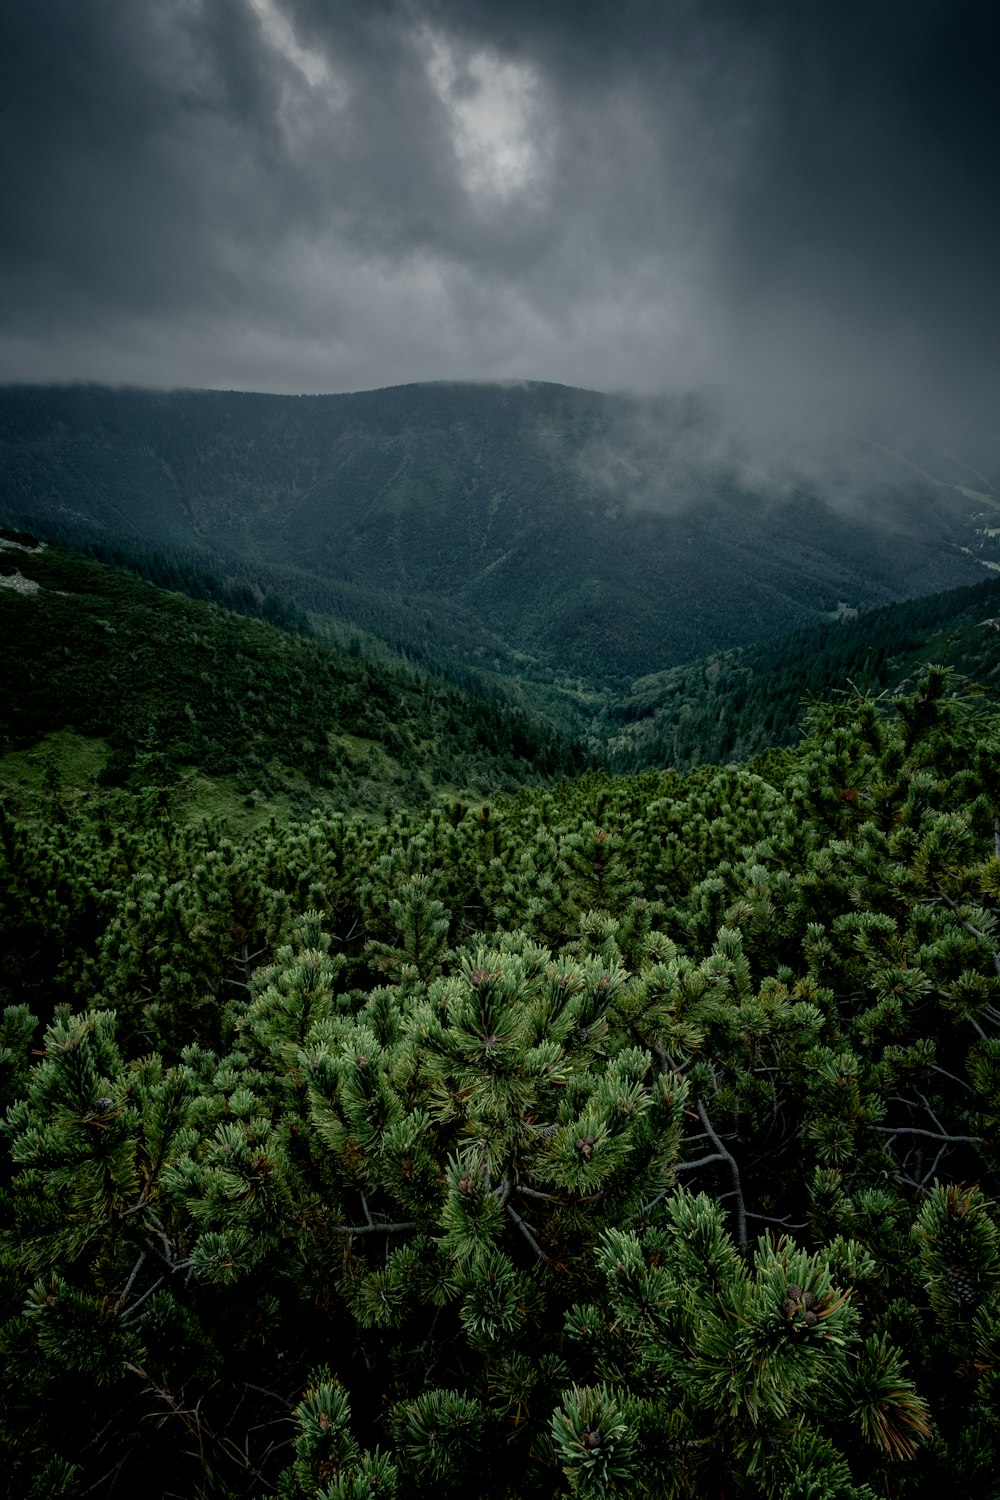 a forest filled with lots of green trees under a cloudy sky